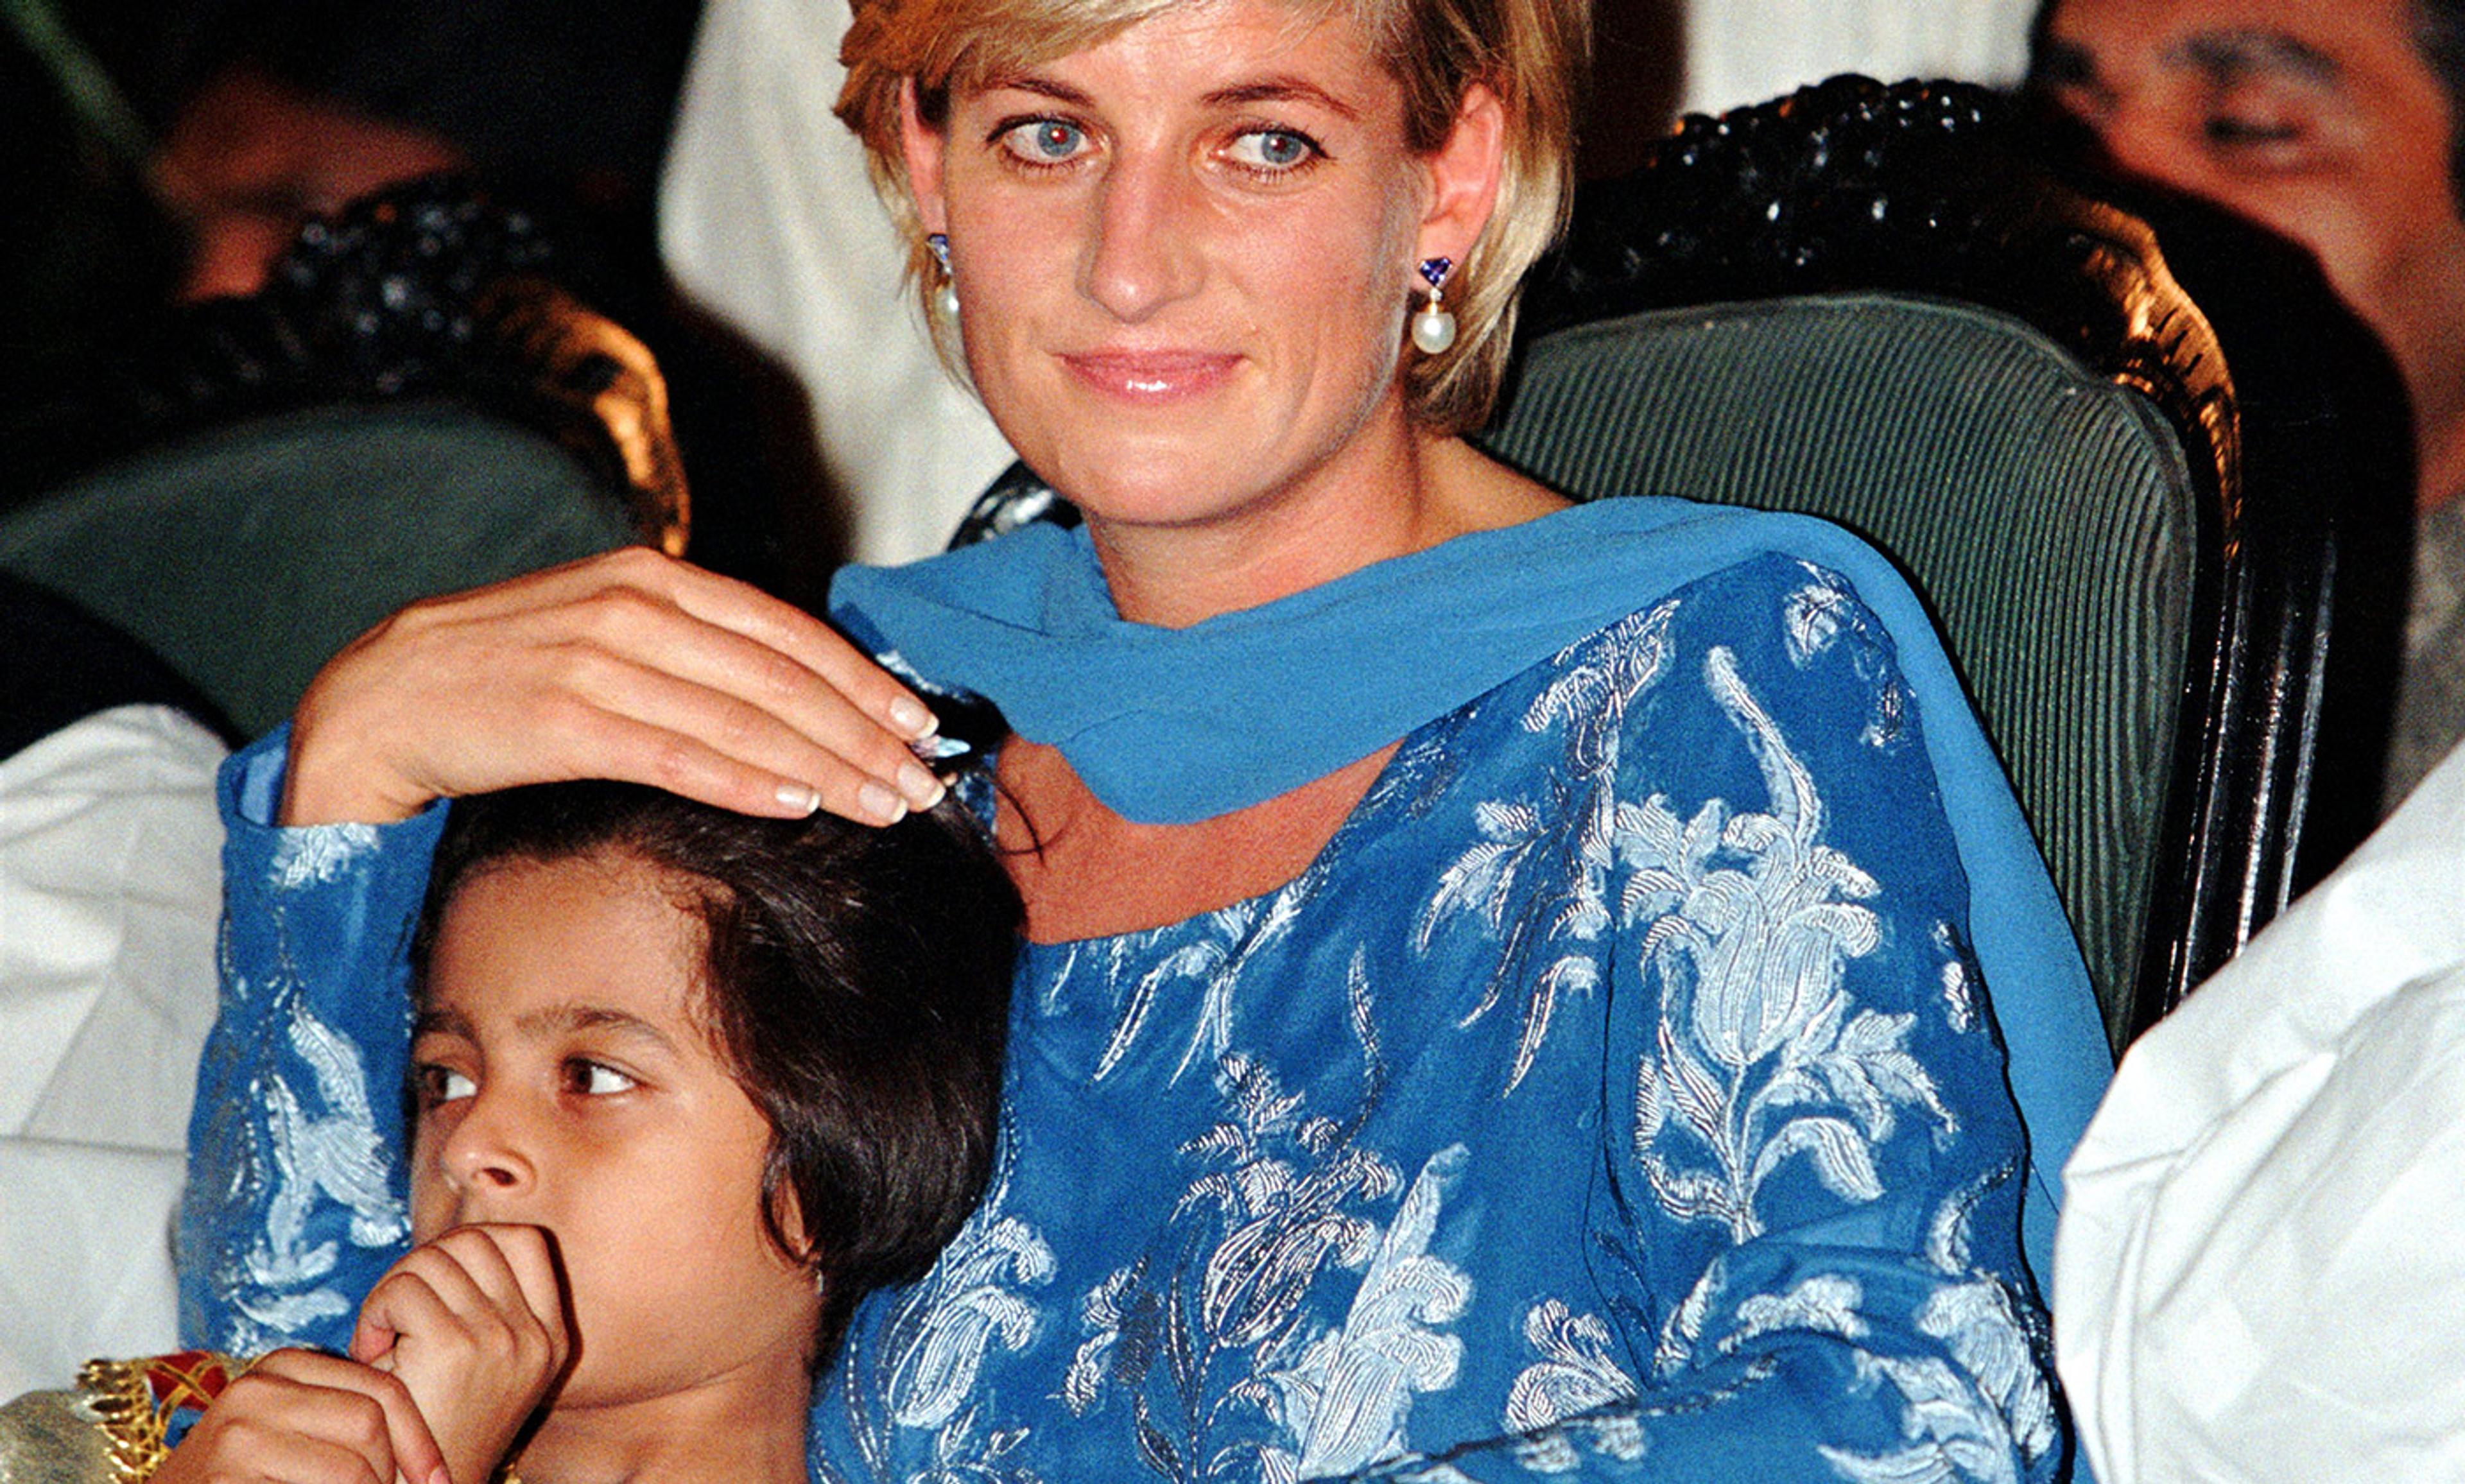 <p>The royal touch; Princess Diana with a young cancer patient in Lahore, Pakistan, May 1997. <em>Photo by Rex Features</em></p>